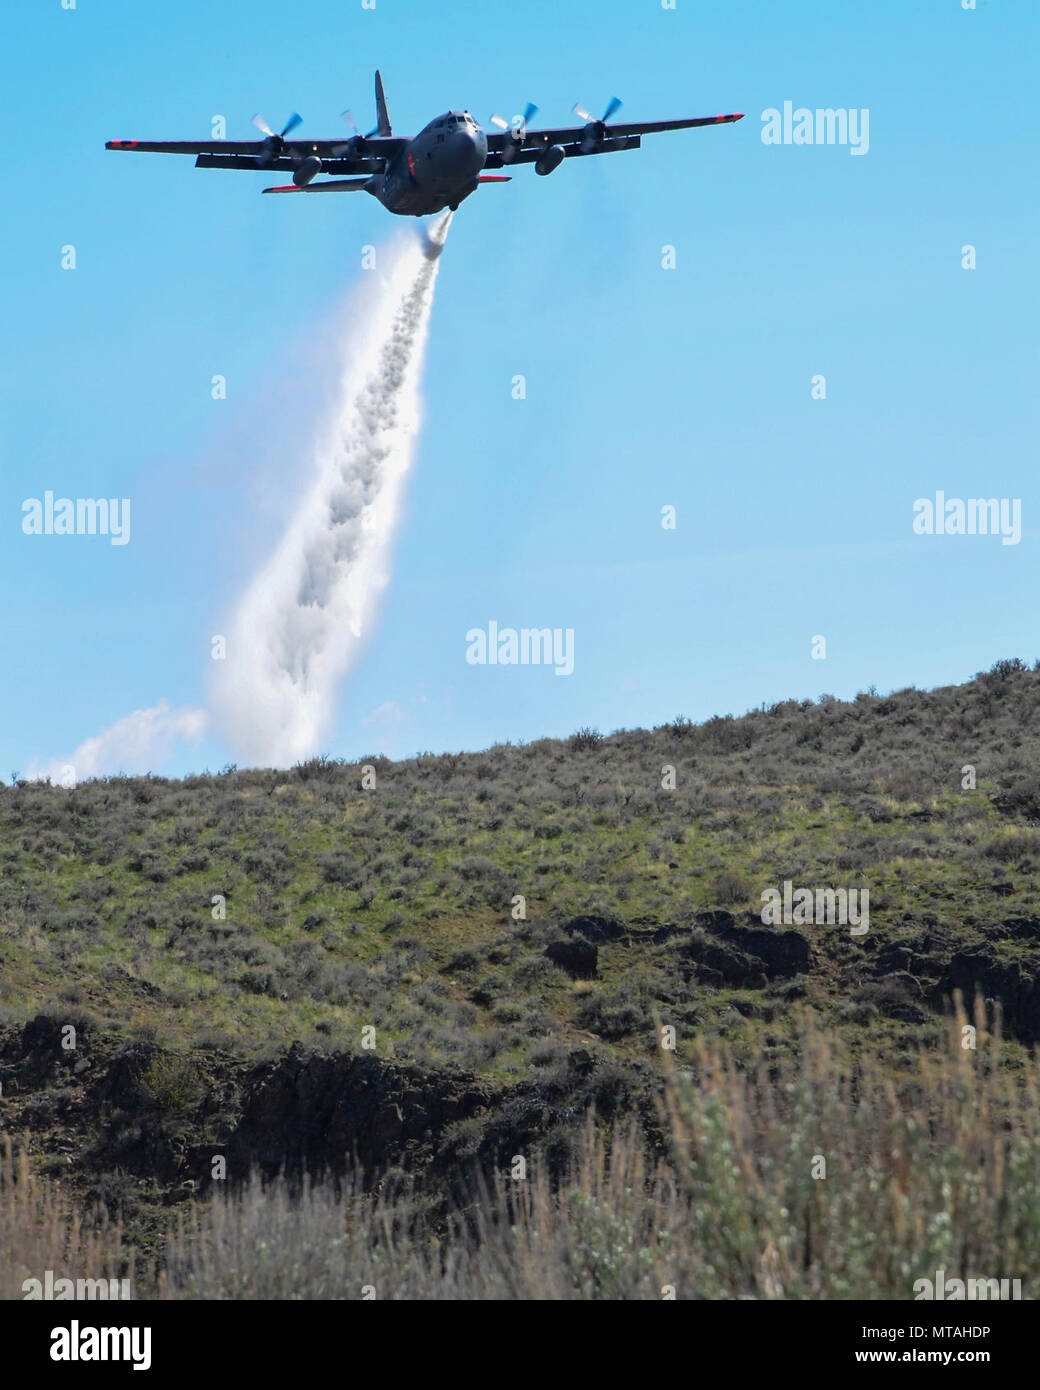 A C130h aircraft loaded with the MAFFS (Modular Airborne Fire Fighting System) from the 152nd Airlift Wing of Reno, Nevada drops a water line while training to contain wildfires just outside Boise, Idaho. April 21, 2017. More than 400 personnel of four C-130 Guard and Reserve units — from California, Colorado, Nevada and Wyoming, making up the Air Expeditionary Group — are in Boise, Idaho for the week-long wildfire training and certification sponsored by the U.S. Stock Photo